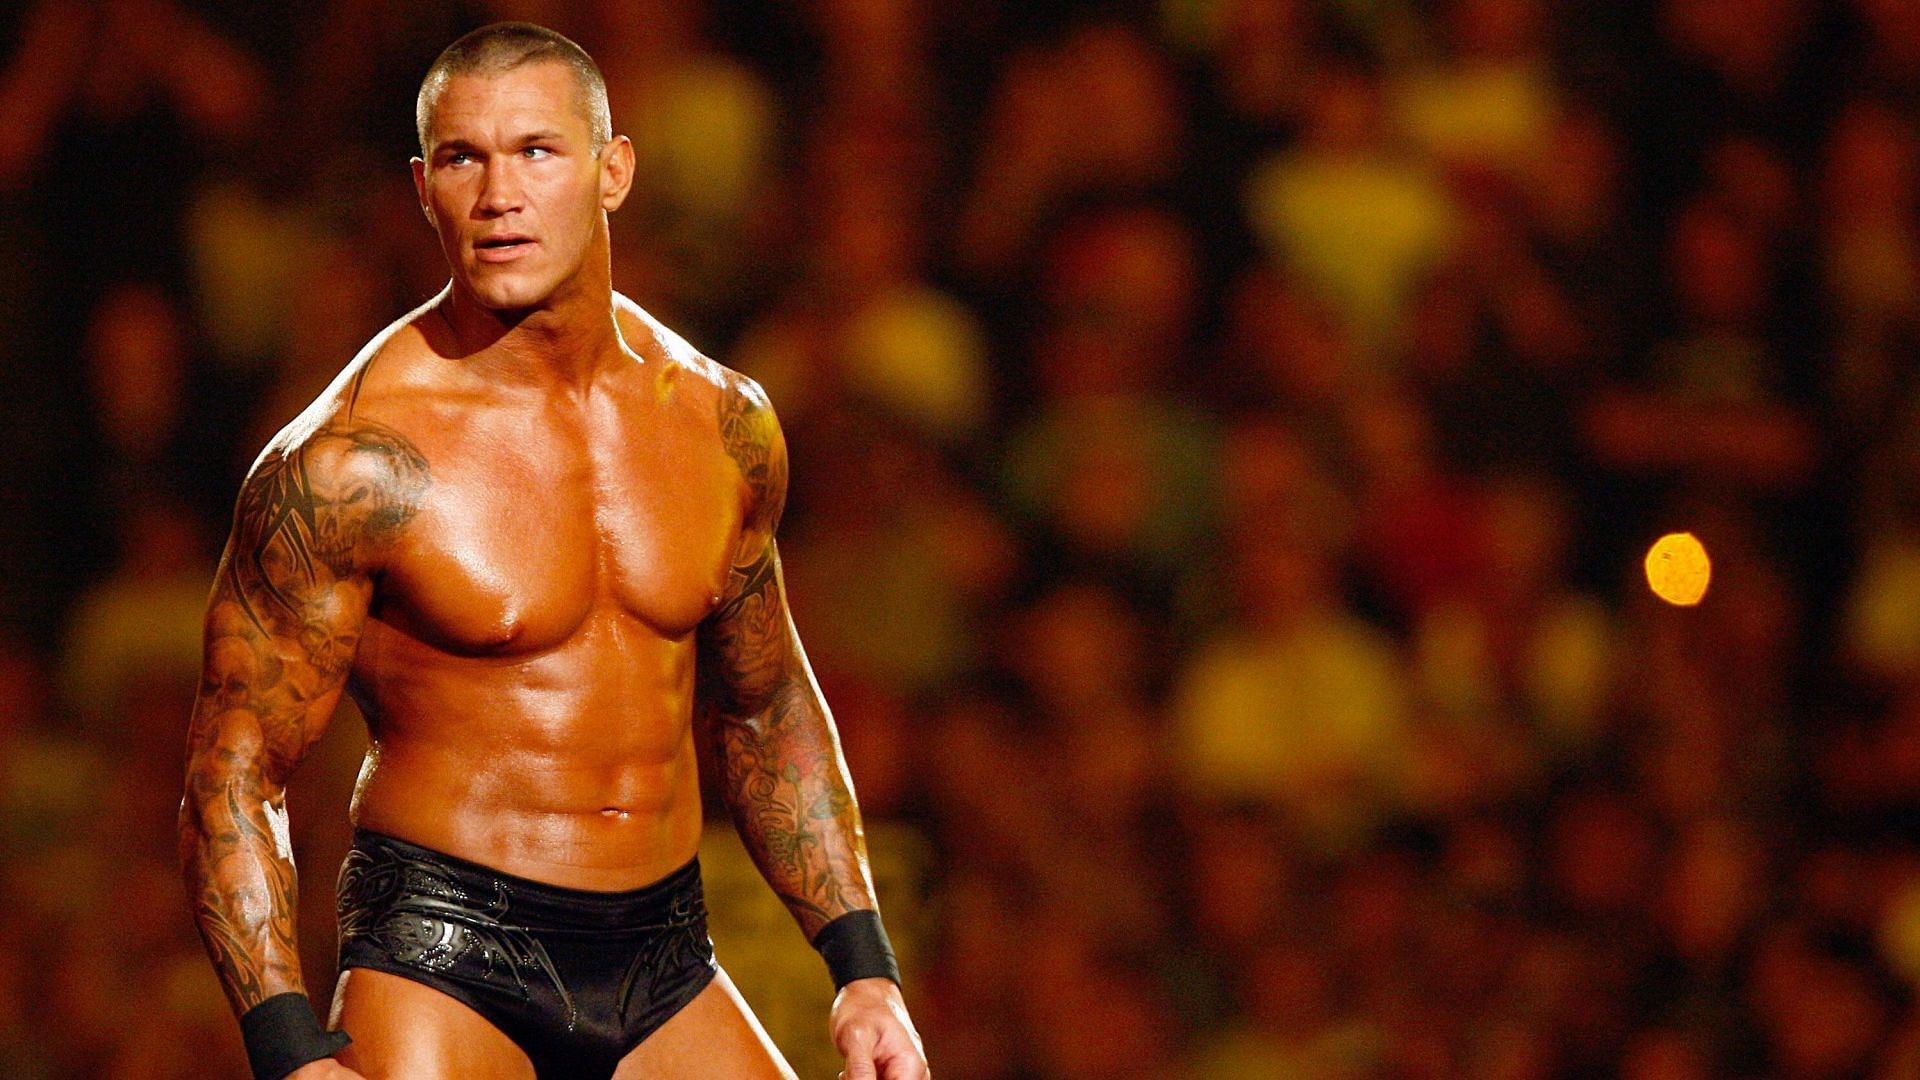 Randy Orton switched many entrance themes before sticking to Voices